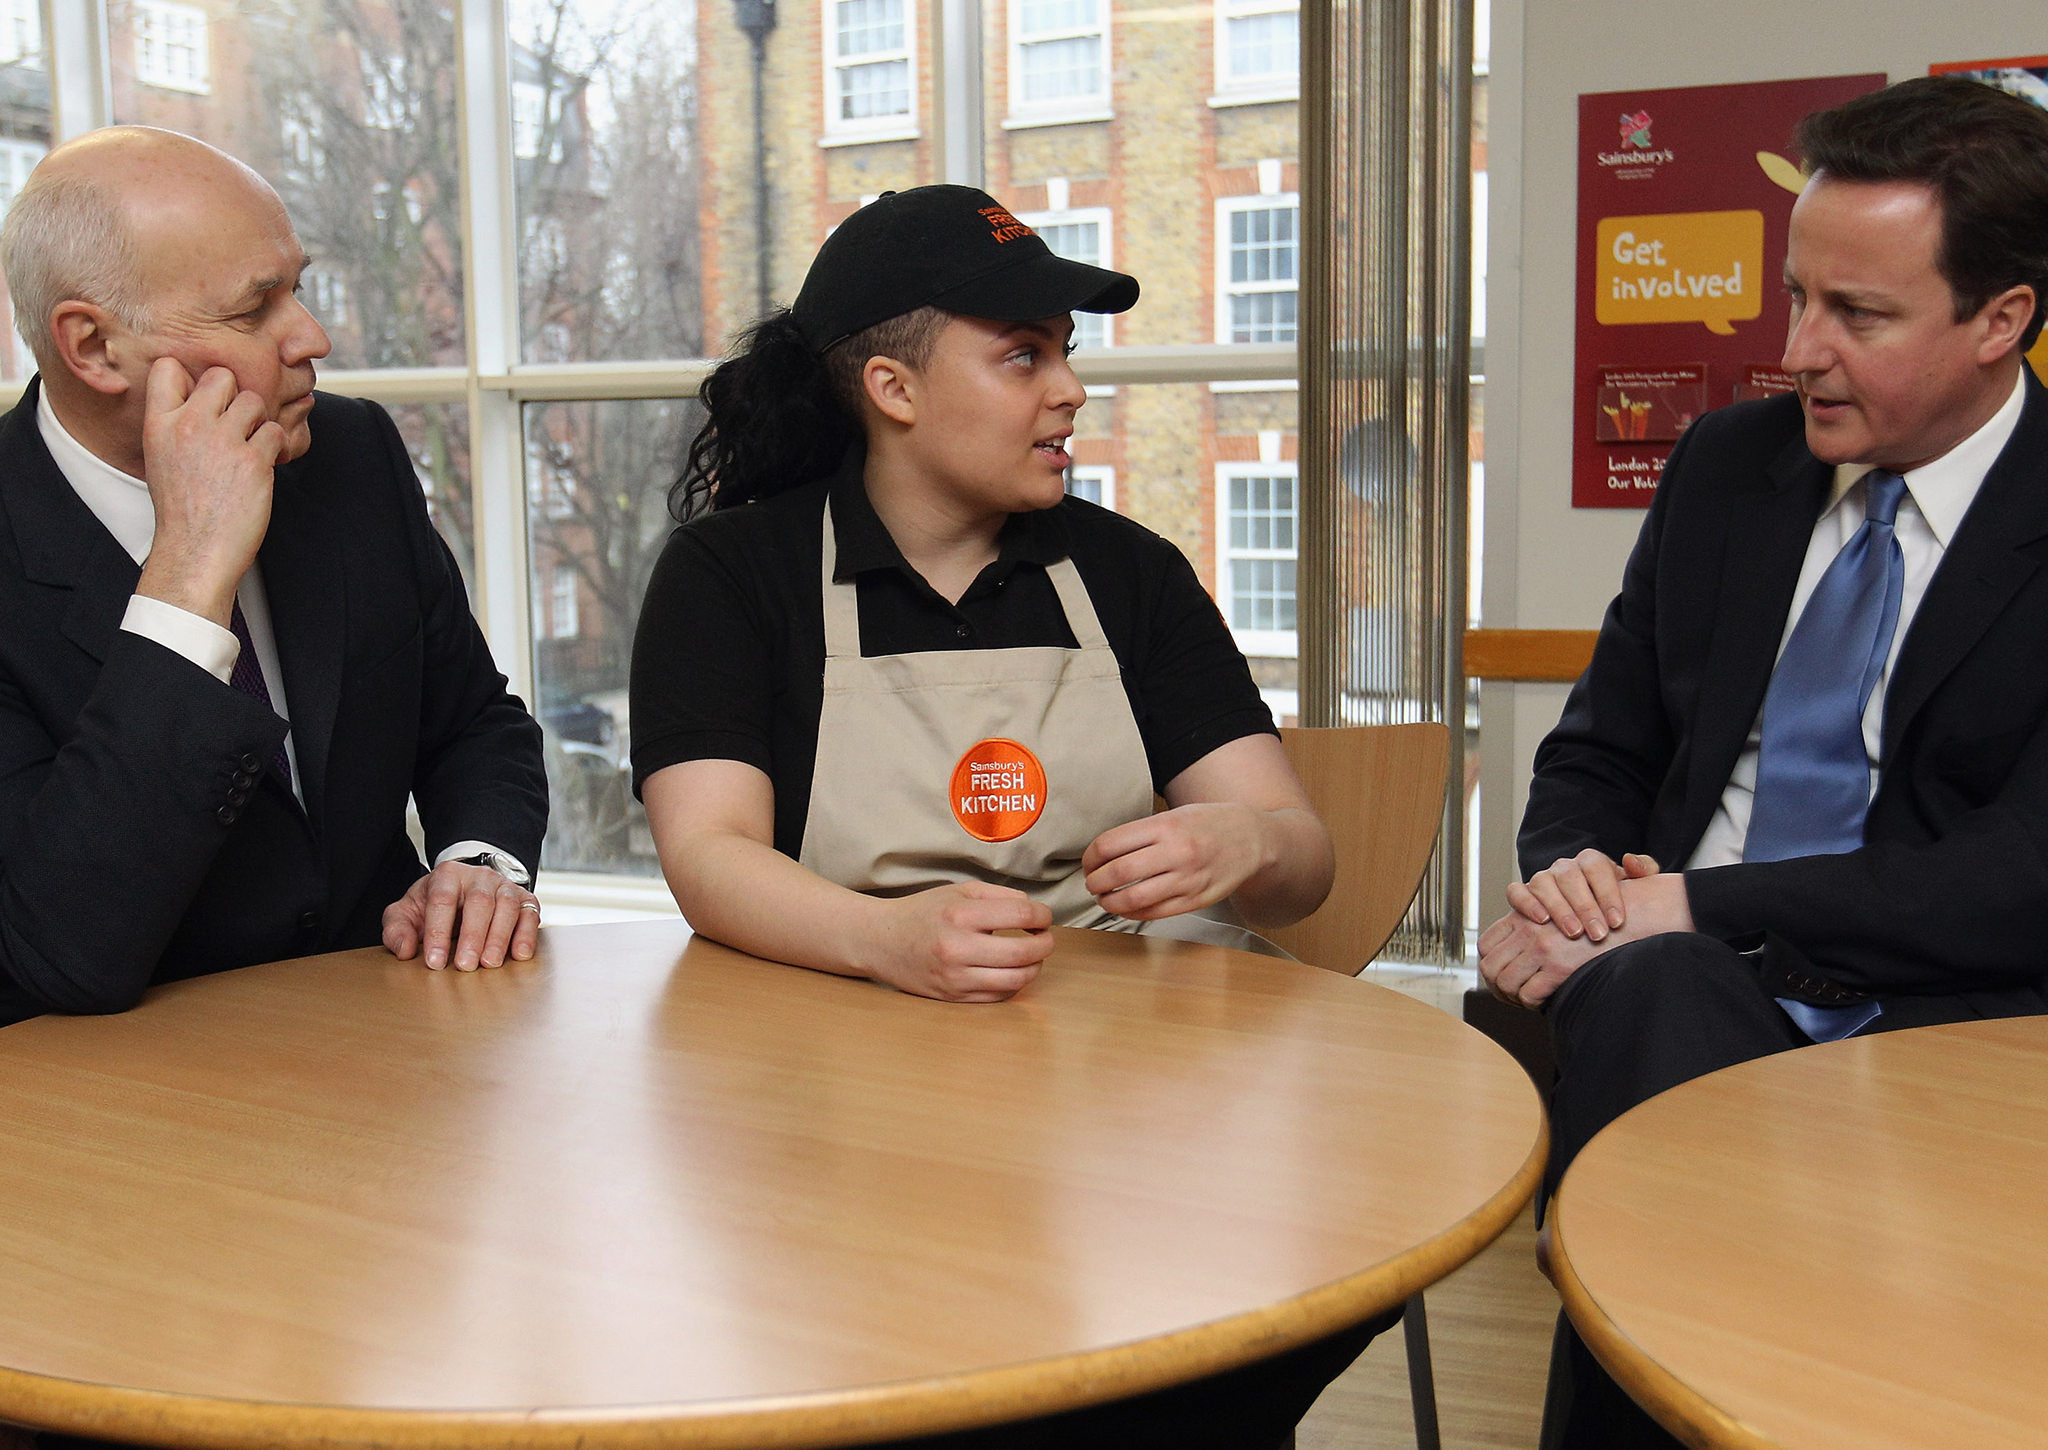 Iain Duncan Smith and David Cameron talk to a Sainsbury's worker to try and figure out how buying groceries works